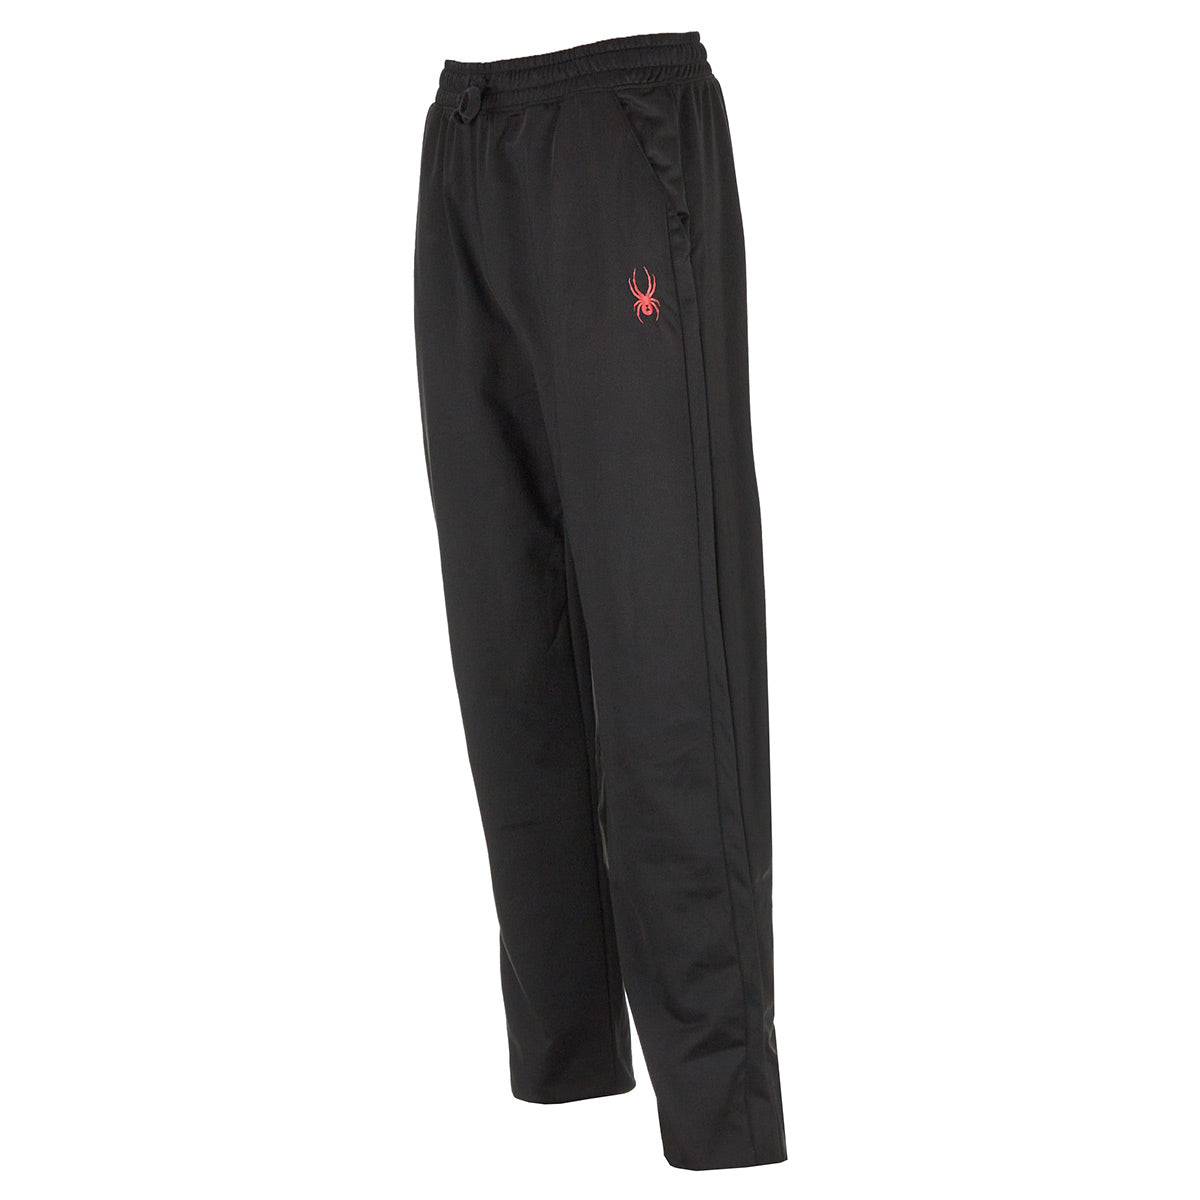 SPYDER ACTIVE with Tech Fleece  Leggings are not pants, Red and